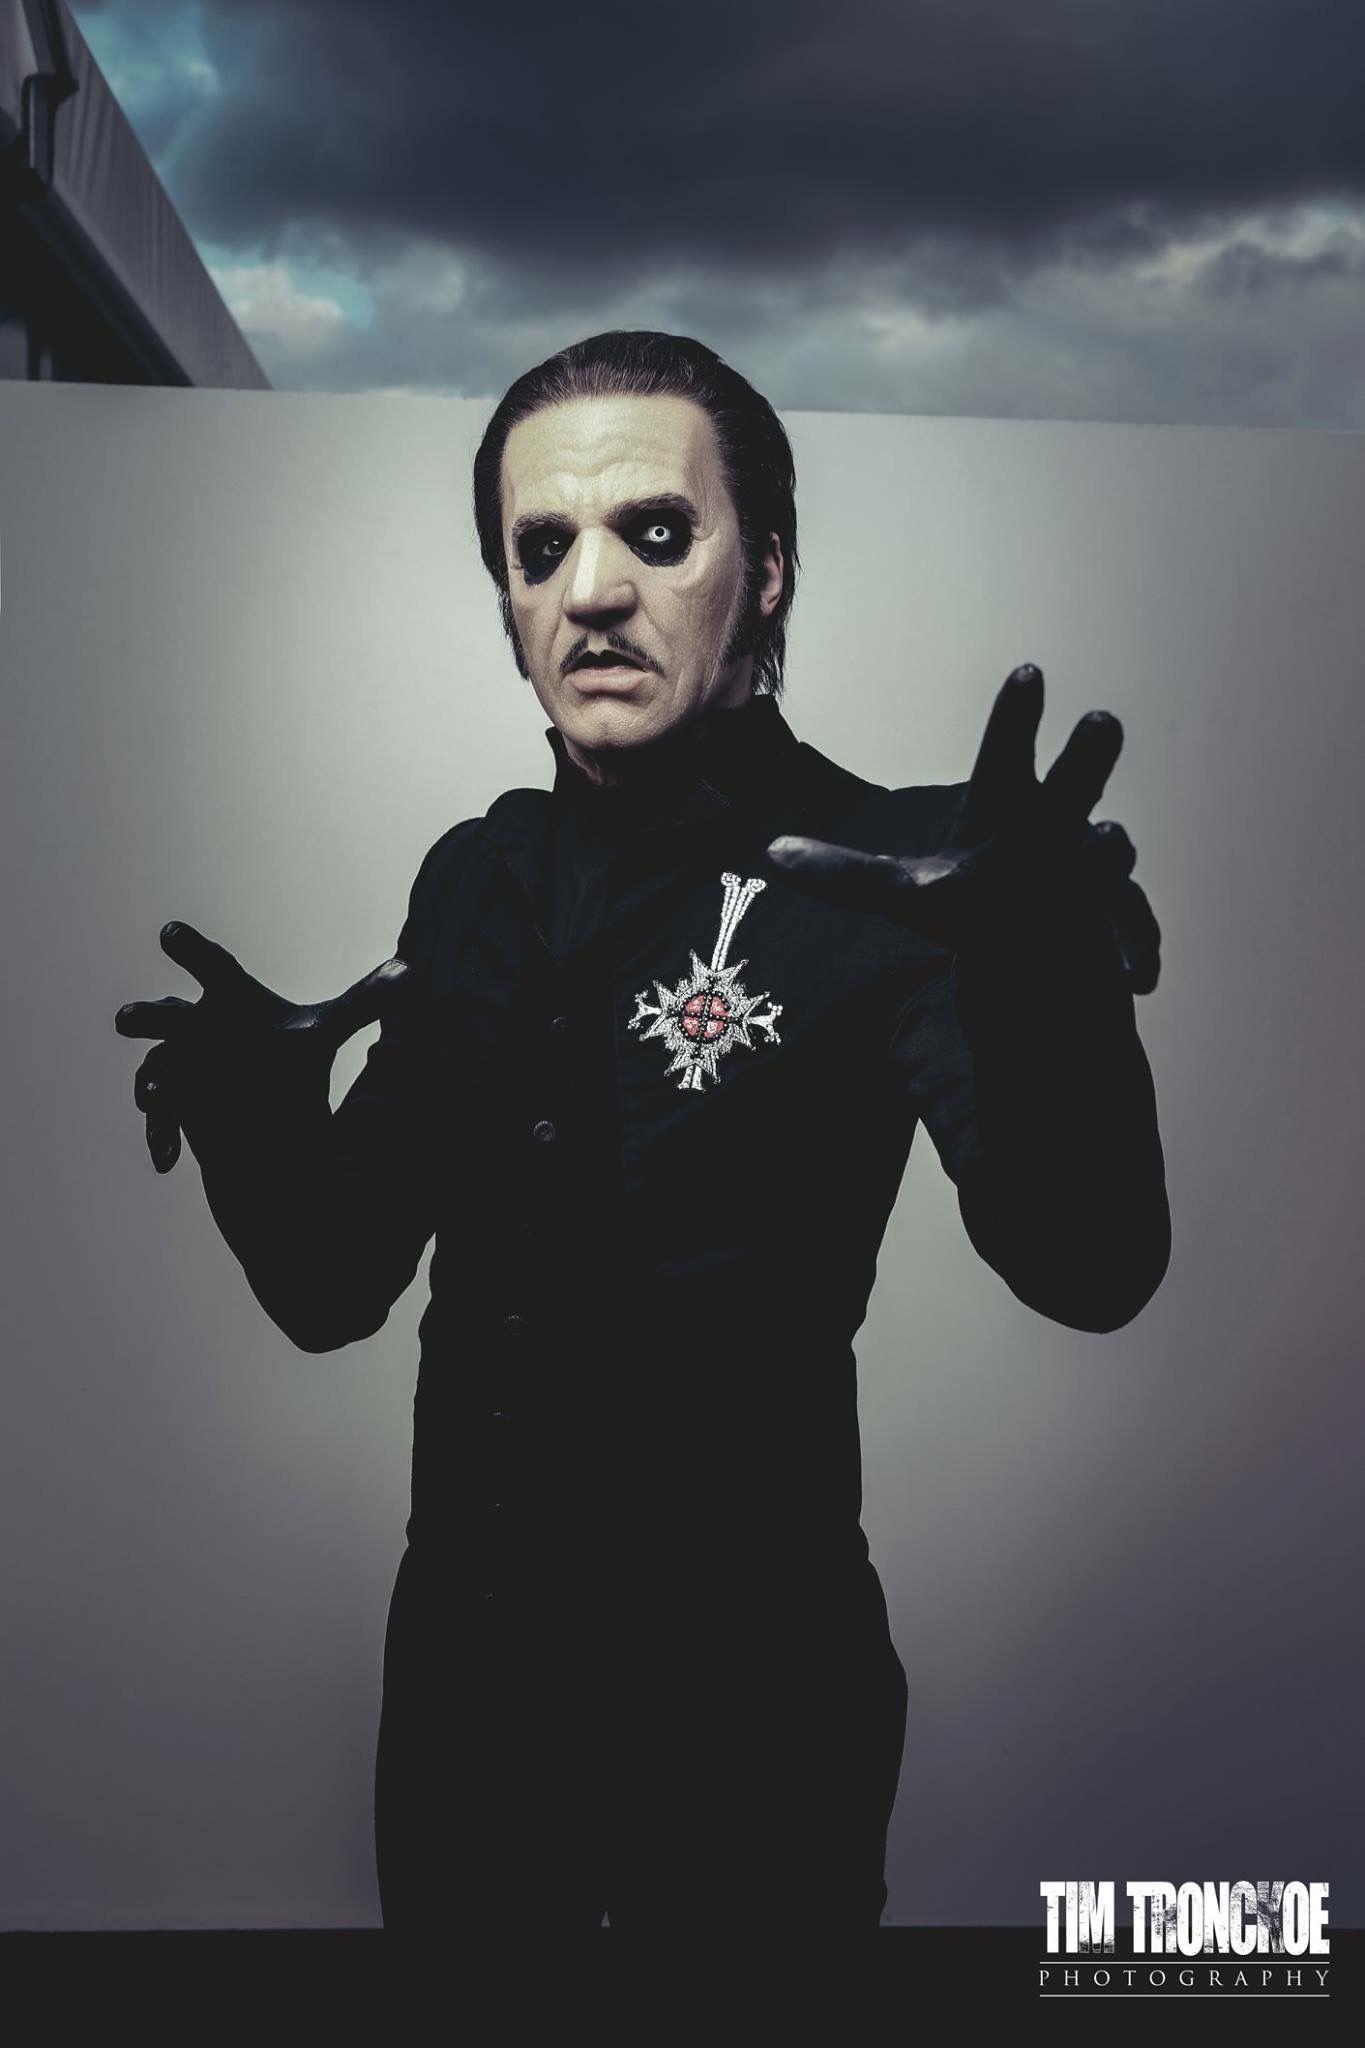 Cardinal Copia. Ghost. Ghost papa, Band ghost, Ghost rock band